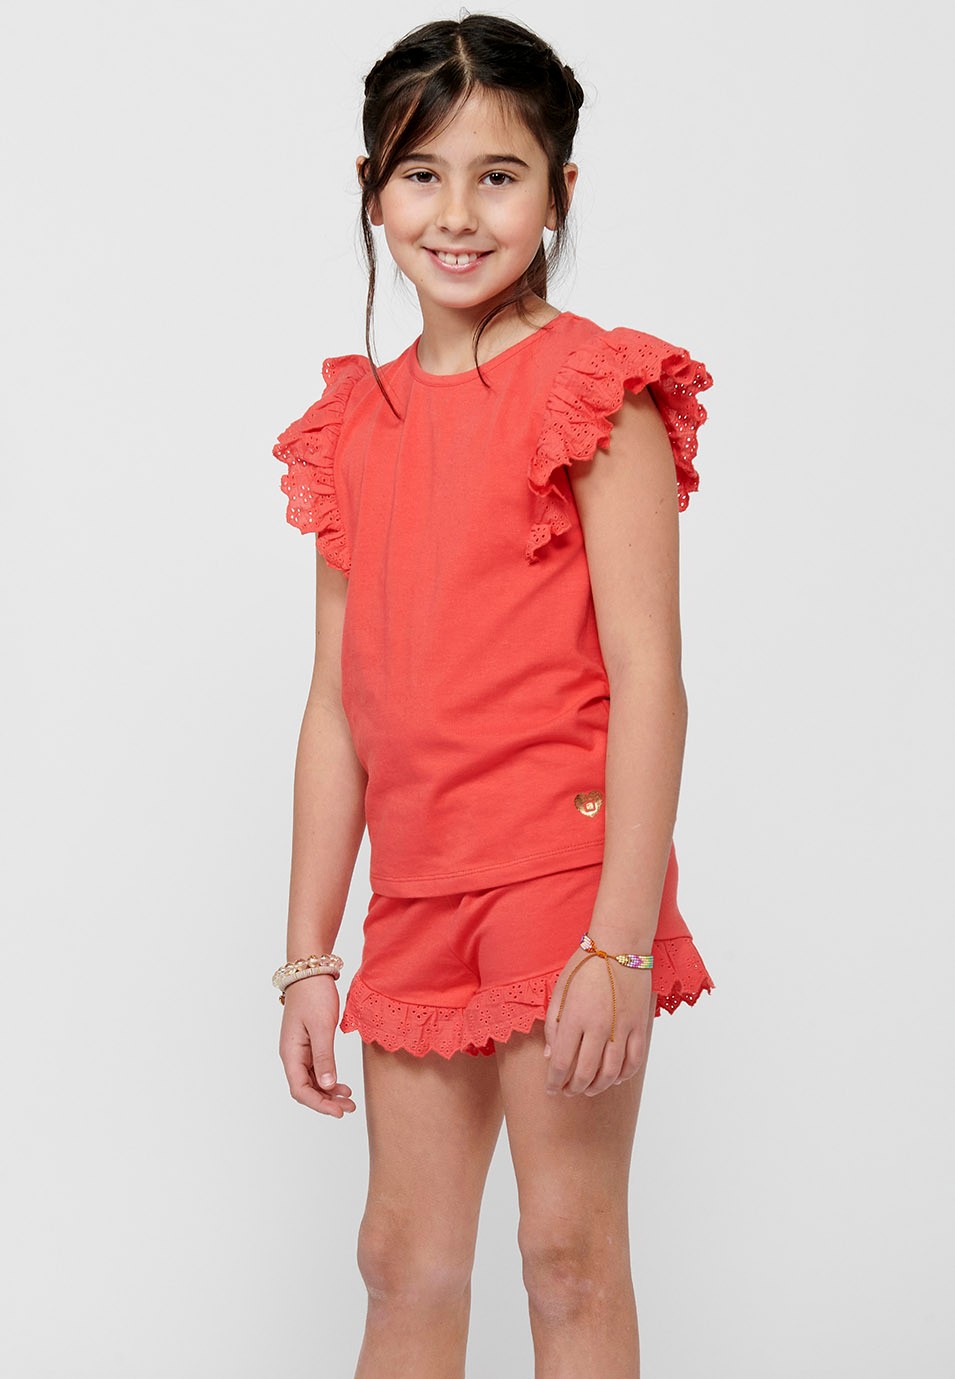 Pack of top and shorts, the sleeveless T-shirt with ruffles and shorts with a ruffle finish, with a rubberized waist in Coral Color for Girls 3